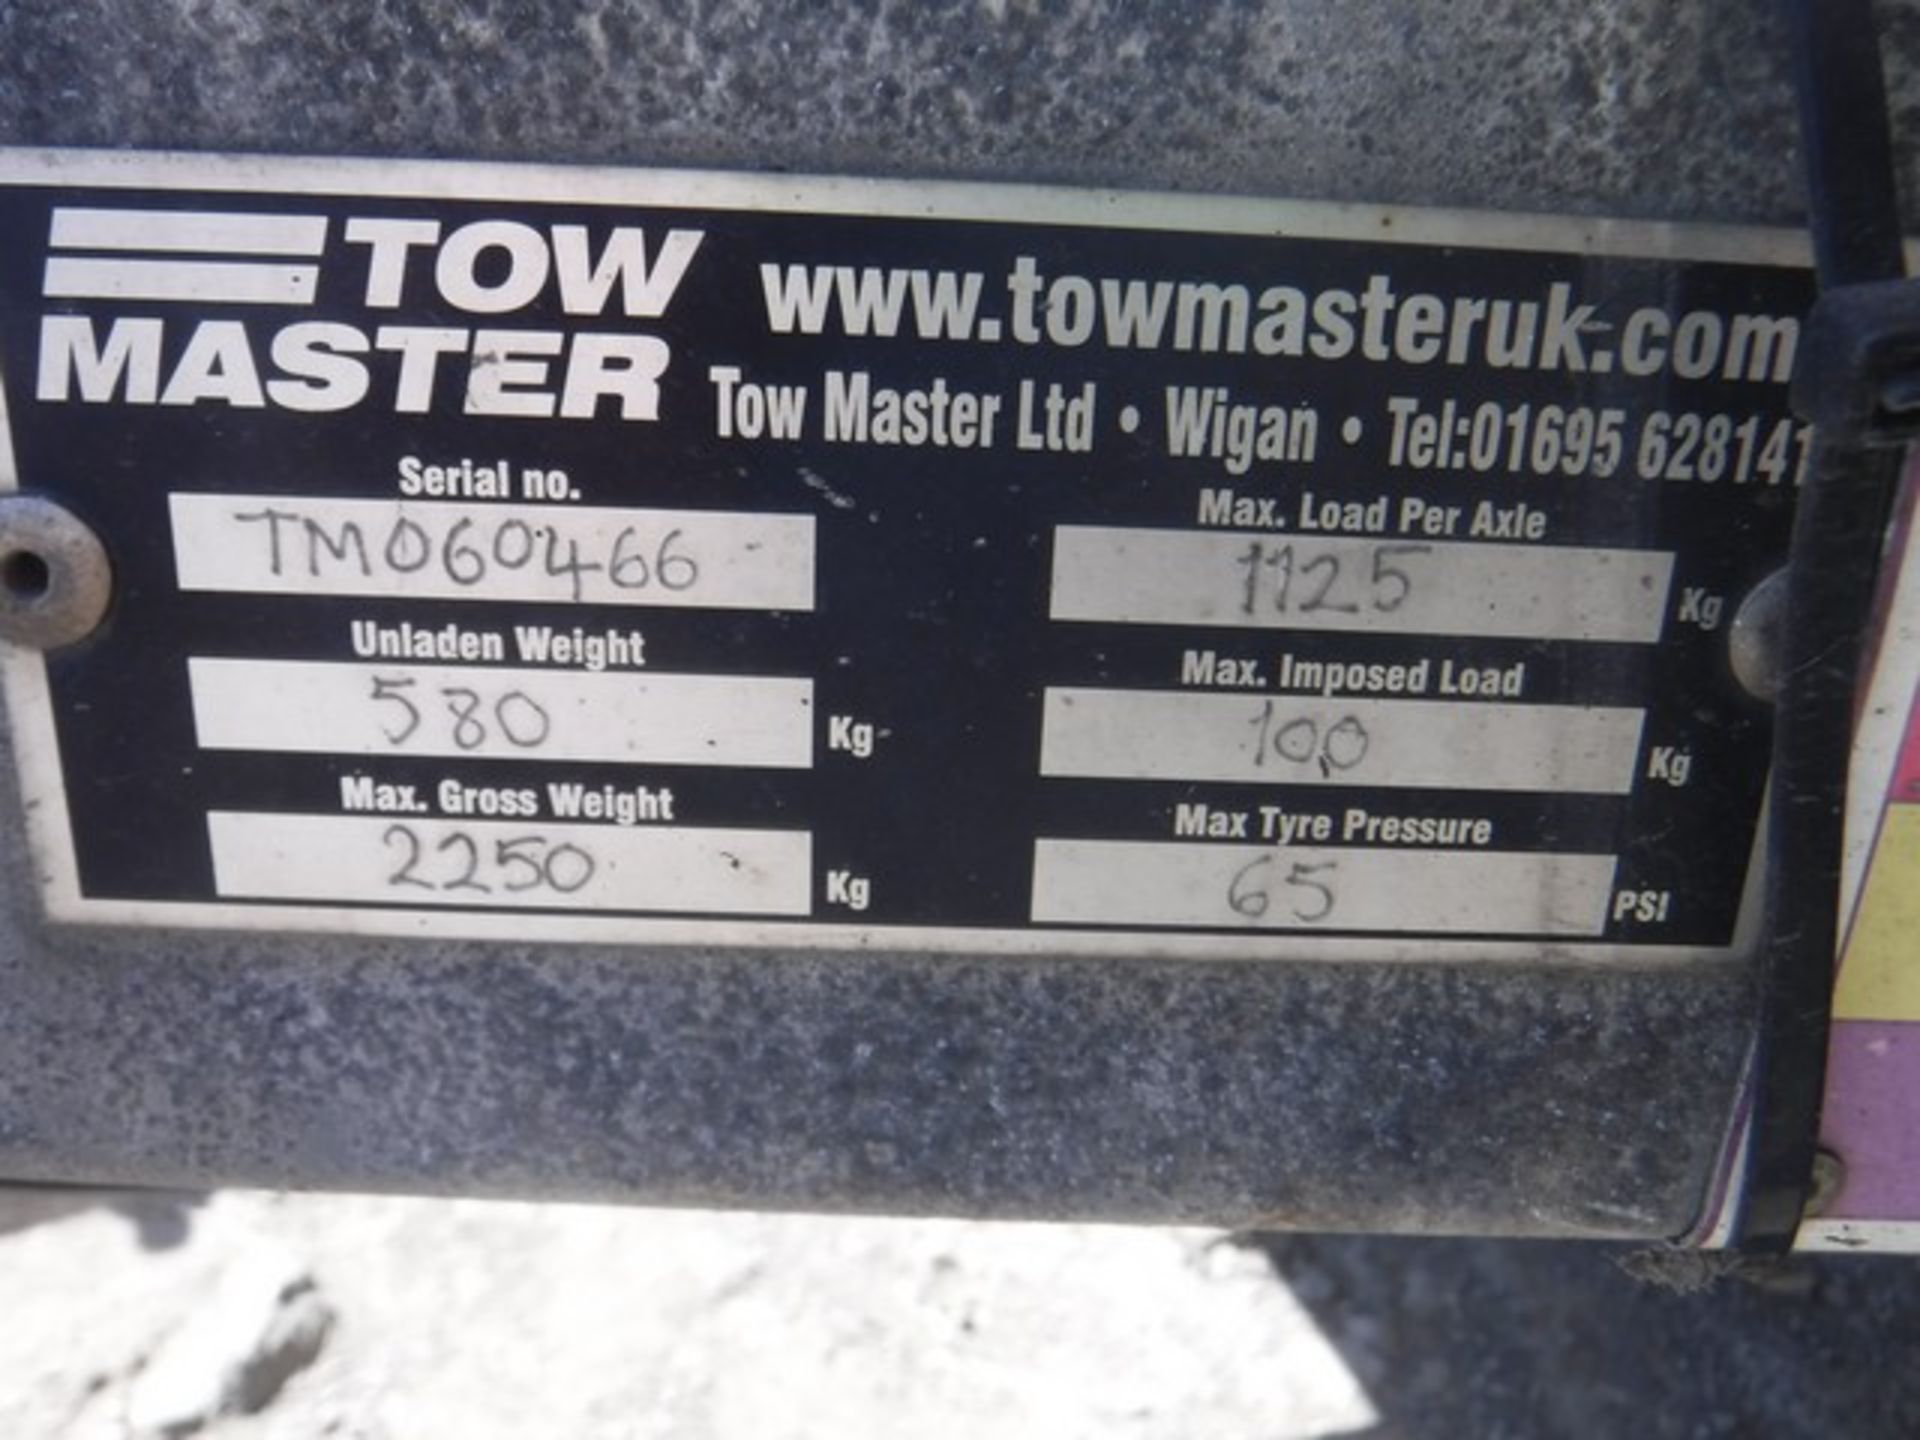 TOWMASTER 8' x 5' twin axle box trailer. Wired with power points. VIN - TM060466. Asset no. 758-6203 - Image 5 of 6